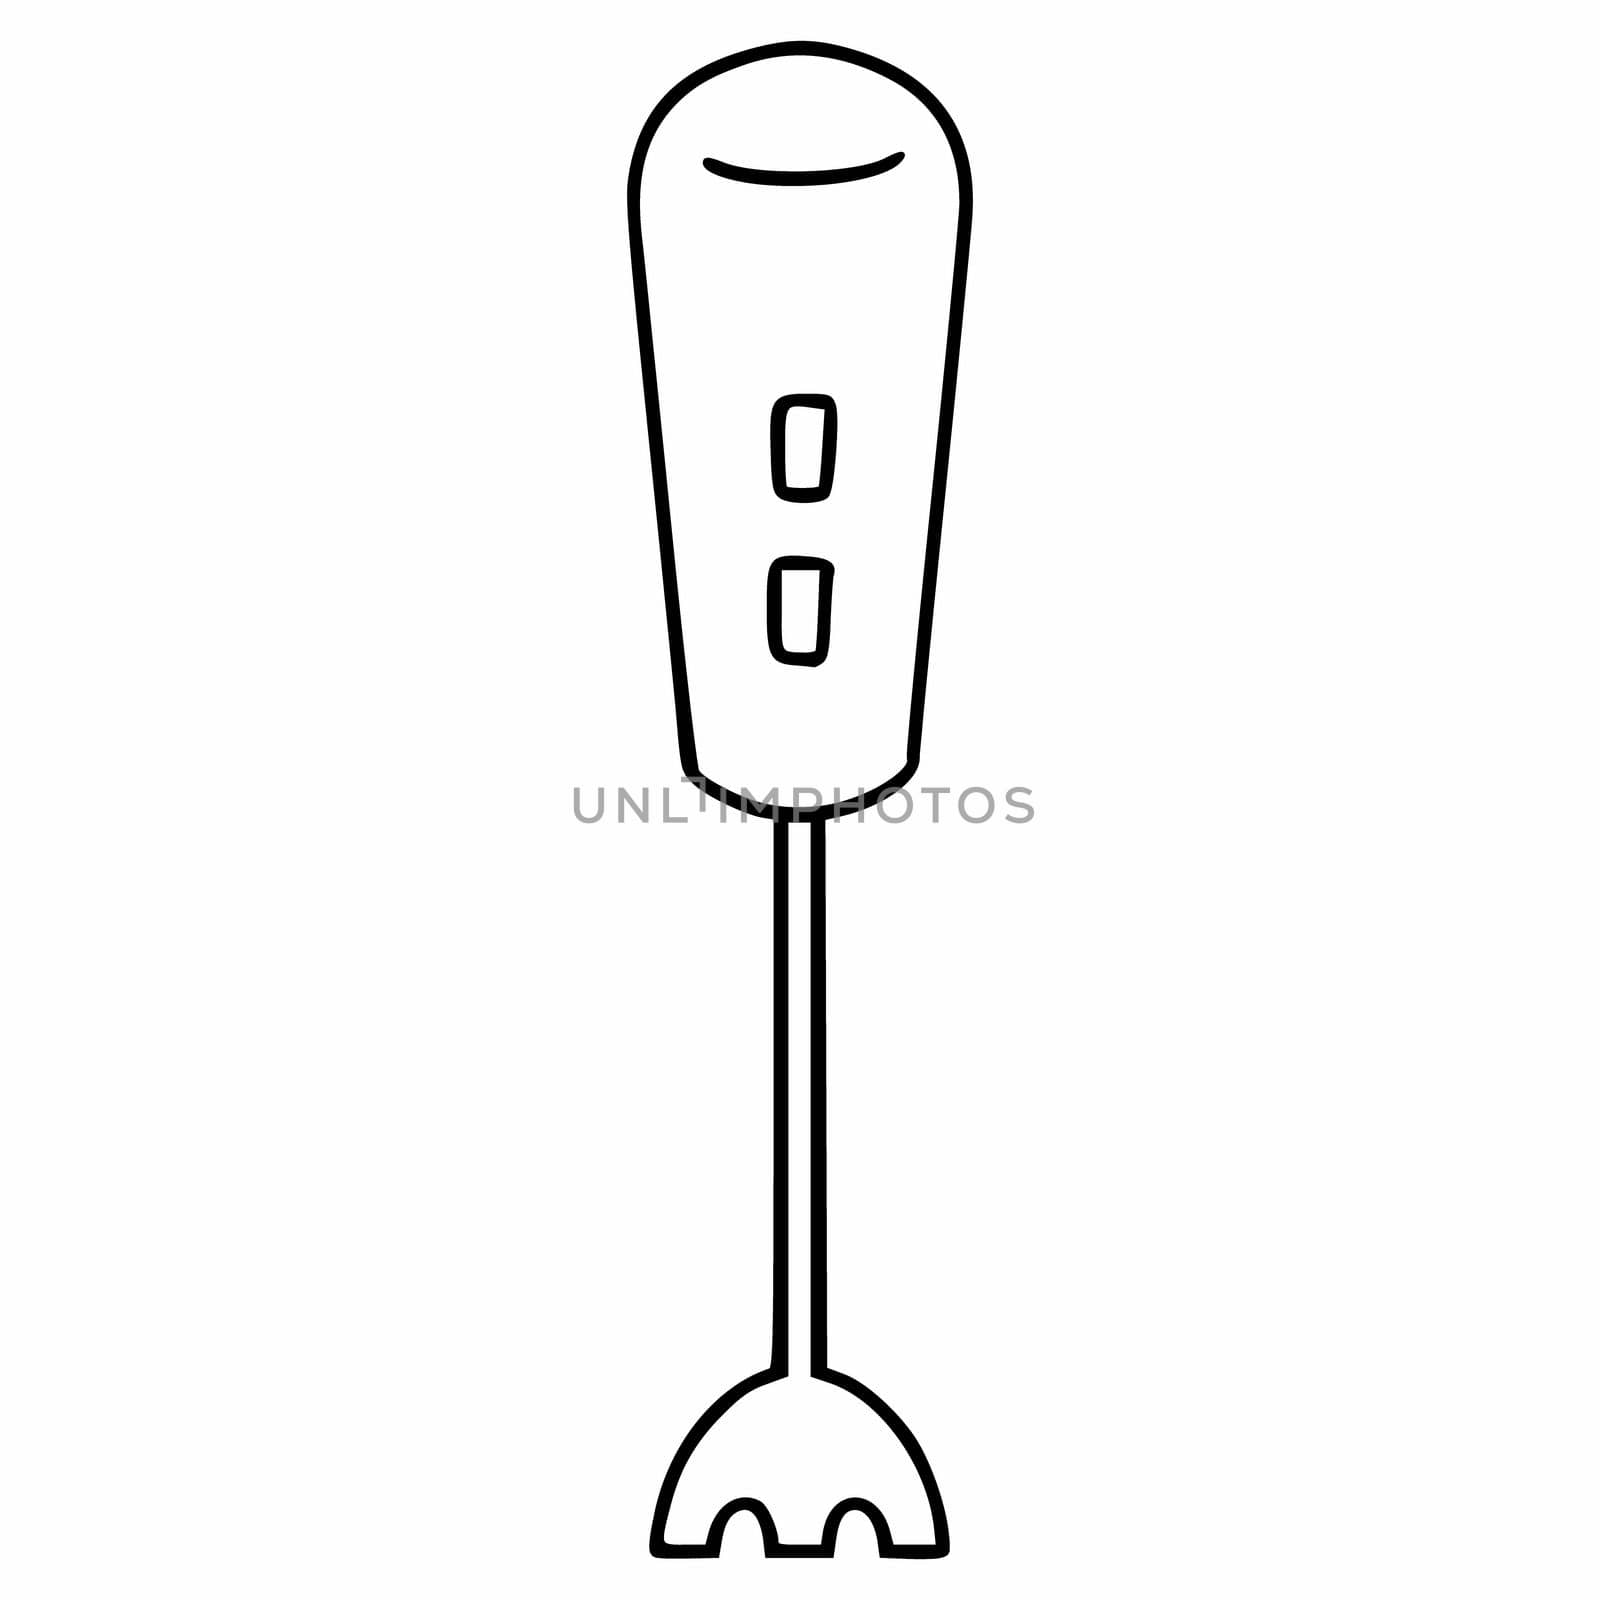 A linear-style immersion blender. Kitchen appliances for chopping food. Vector icon in the doodle style. by polinka_art